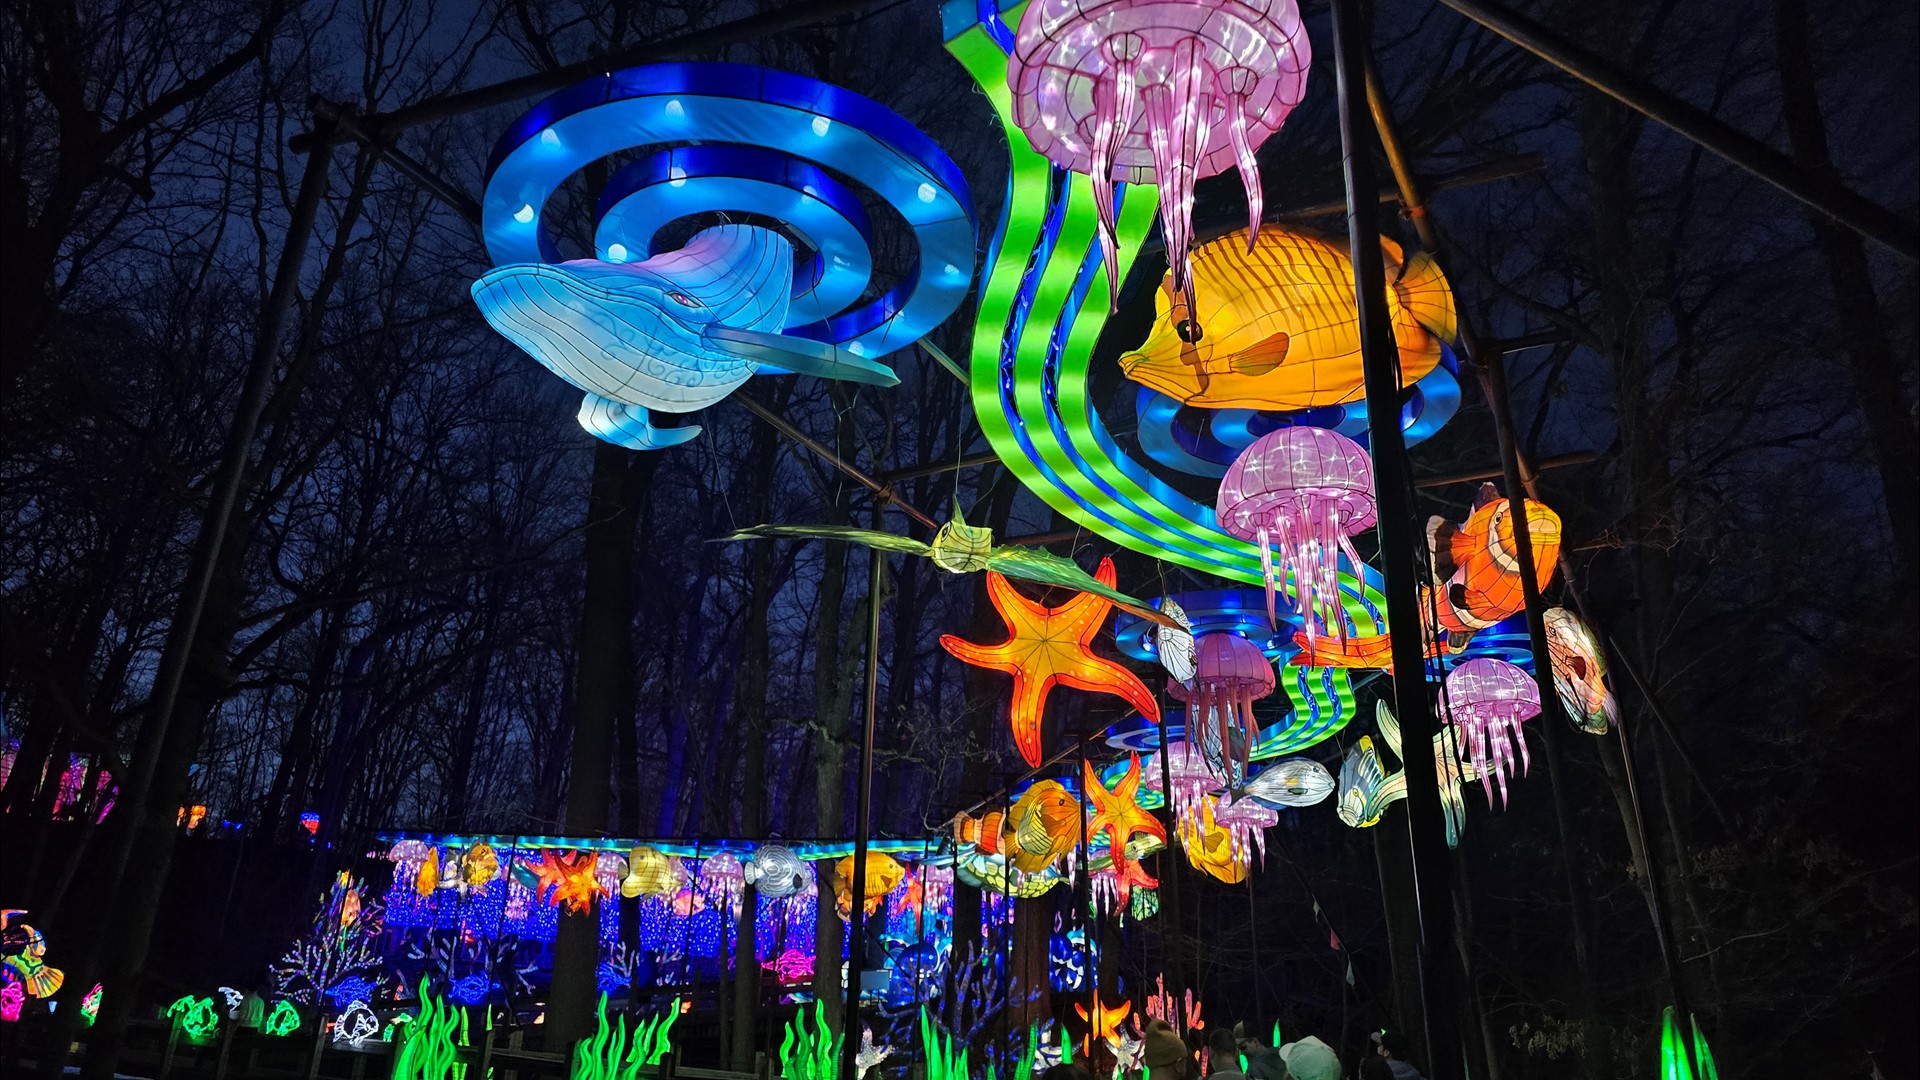 The John Ball Zoo is adding for more chances to see the Lantern Festival before it wraps up in mid-June.